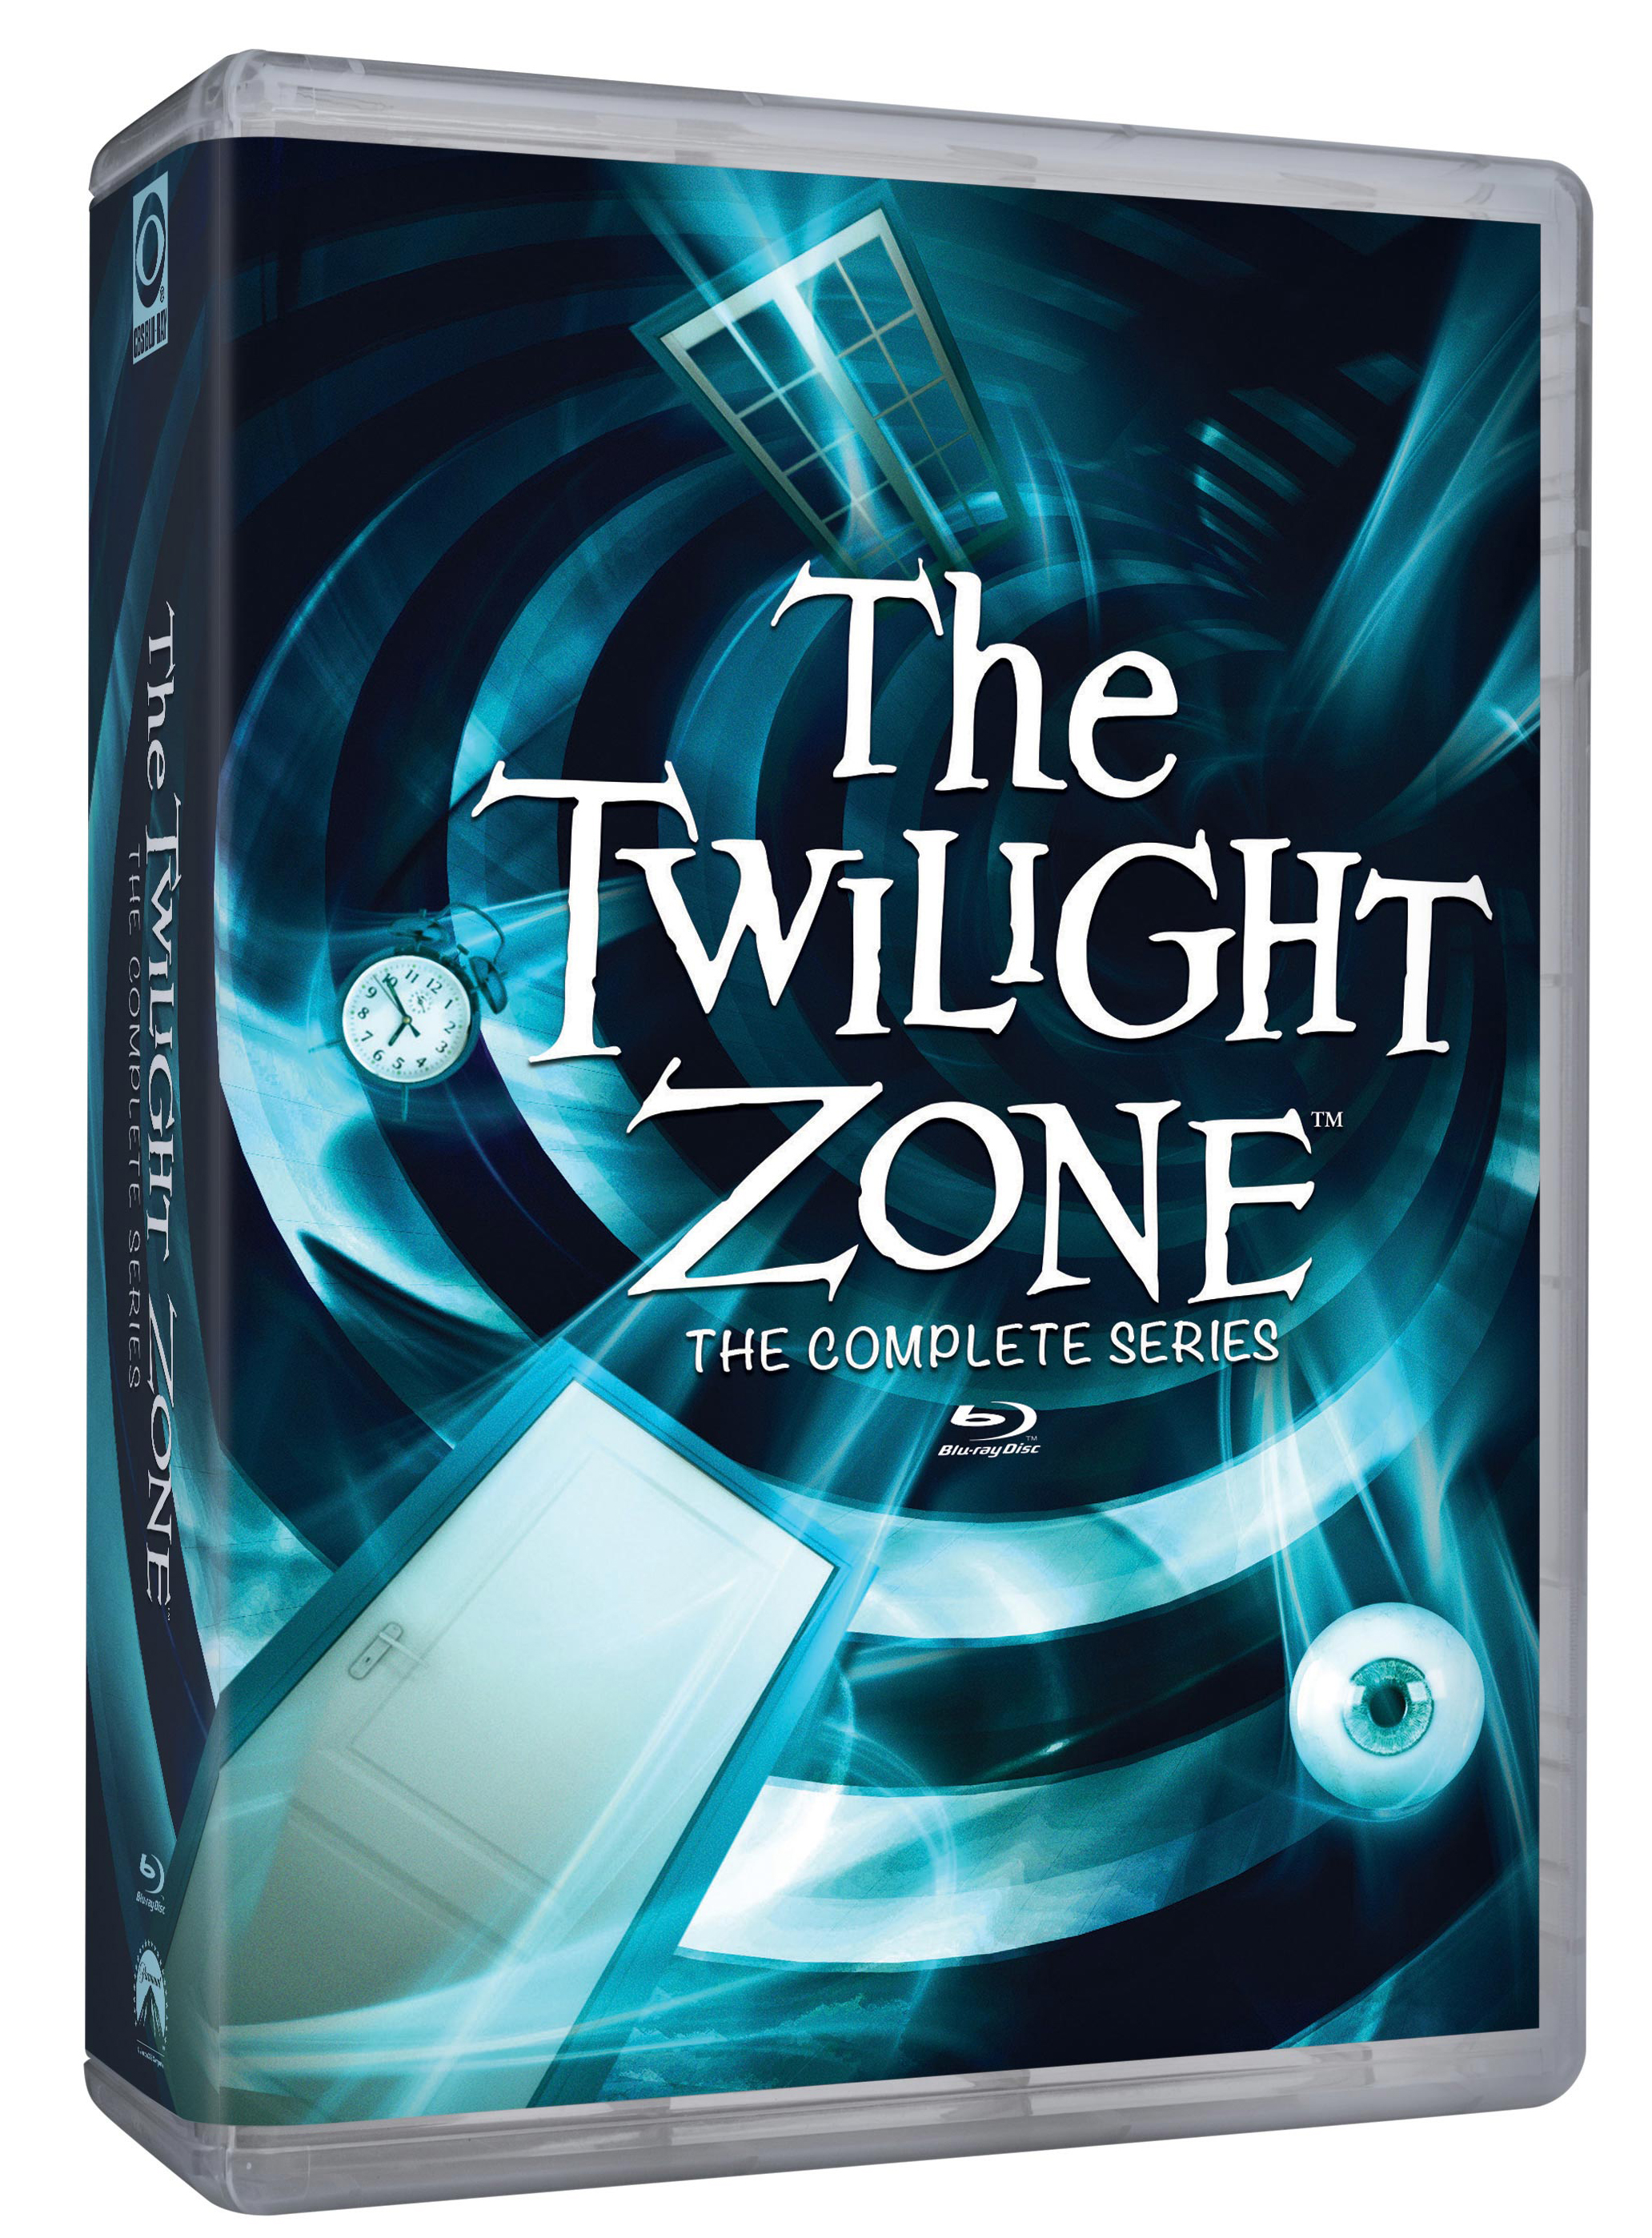 The Twilight Zone: The Complete Series [Blu-ray] [1959] - Best Buy